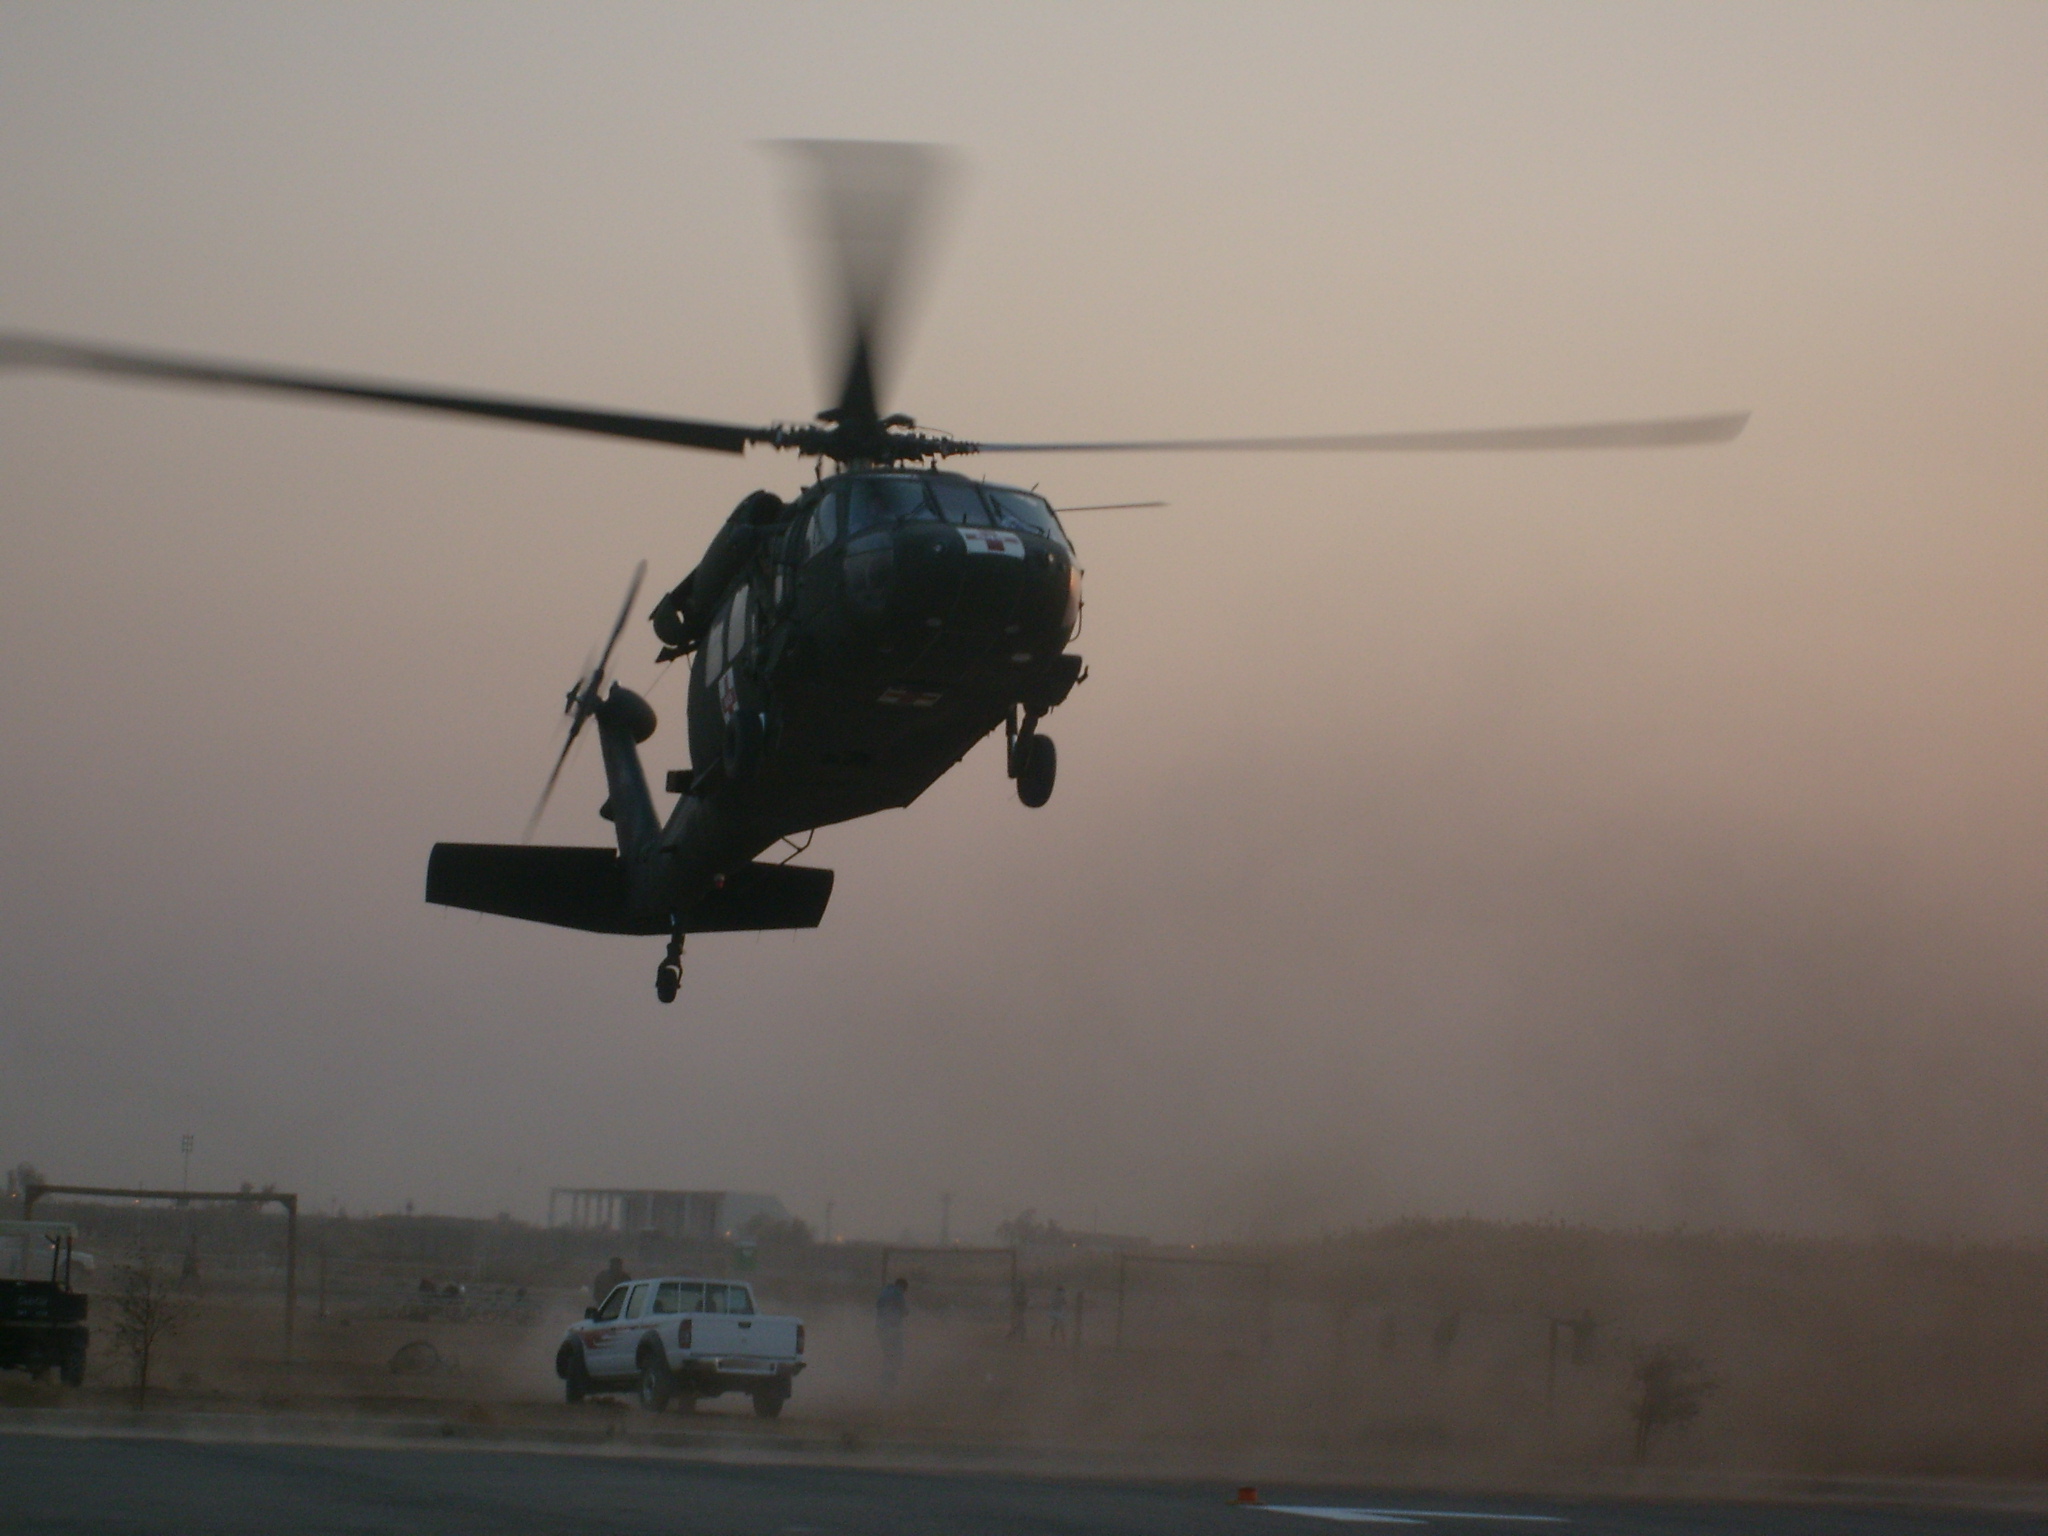 A UH-60 Blackhawk MEDEVAC bird flying in to take away our casualties